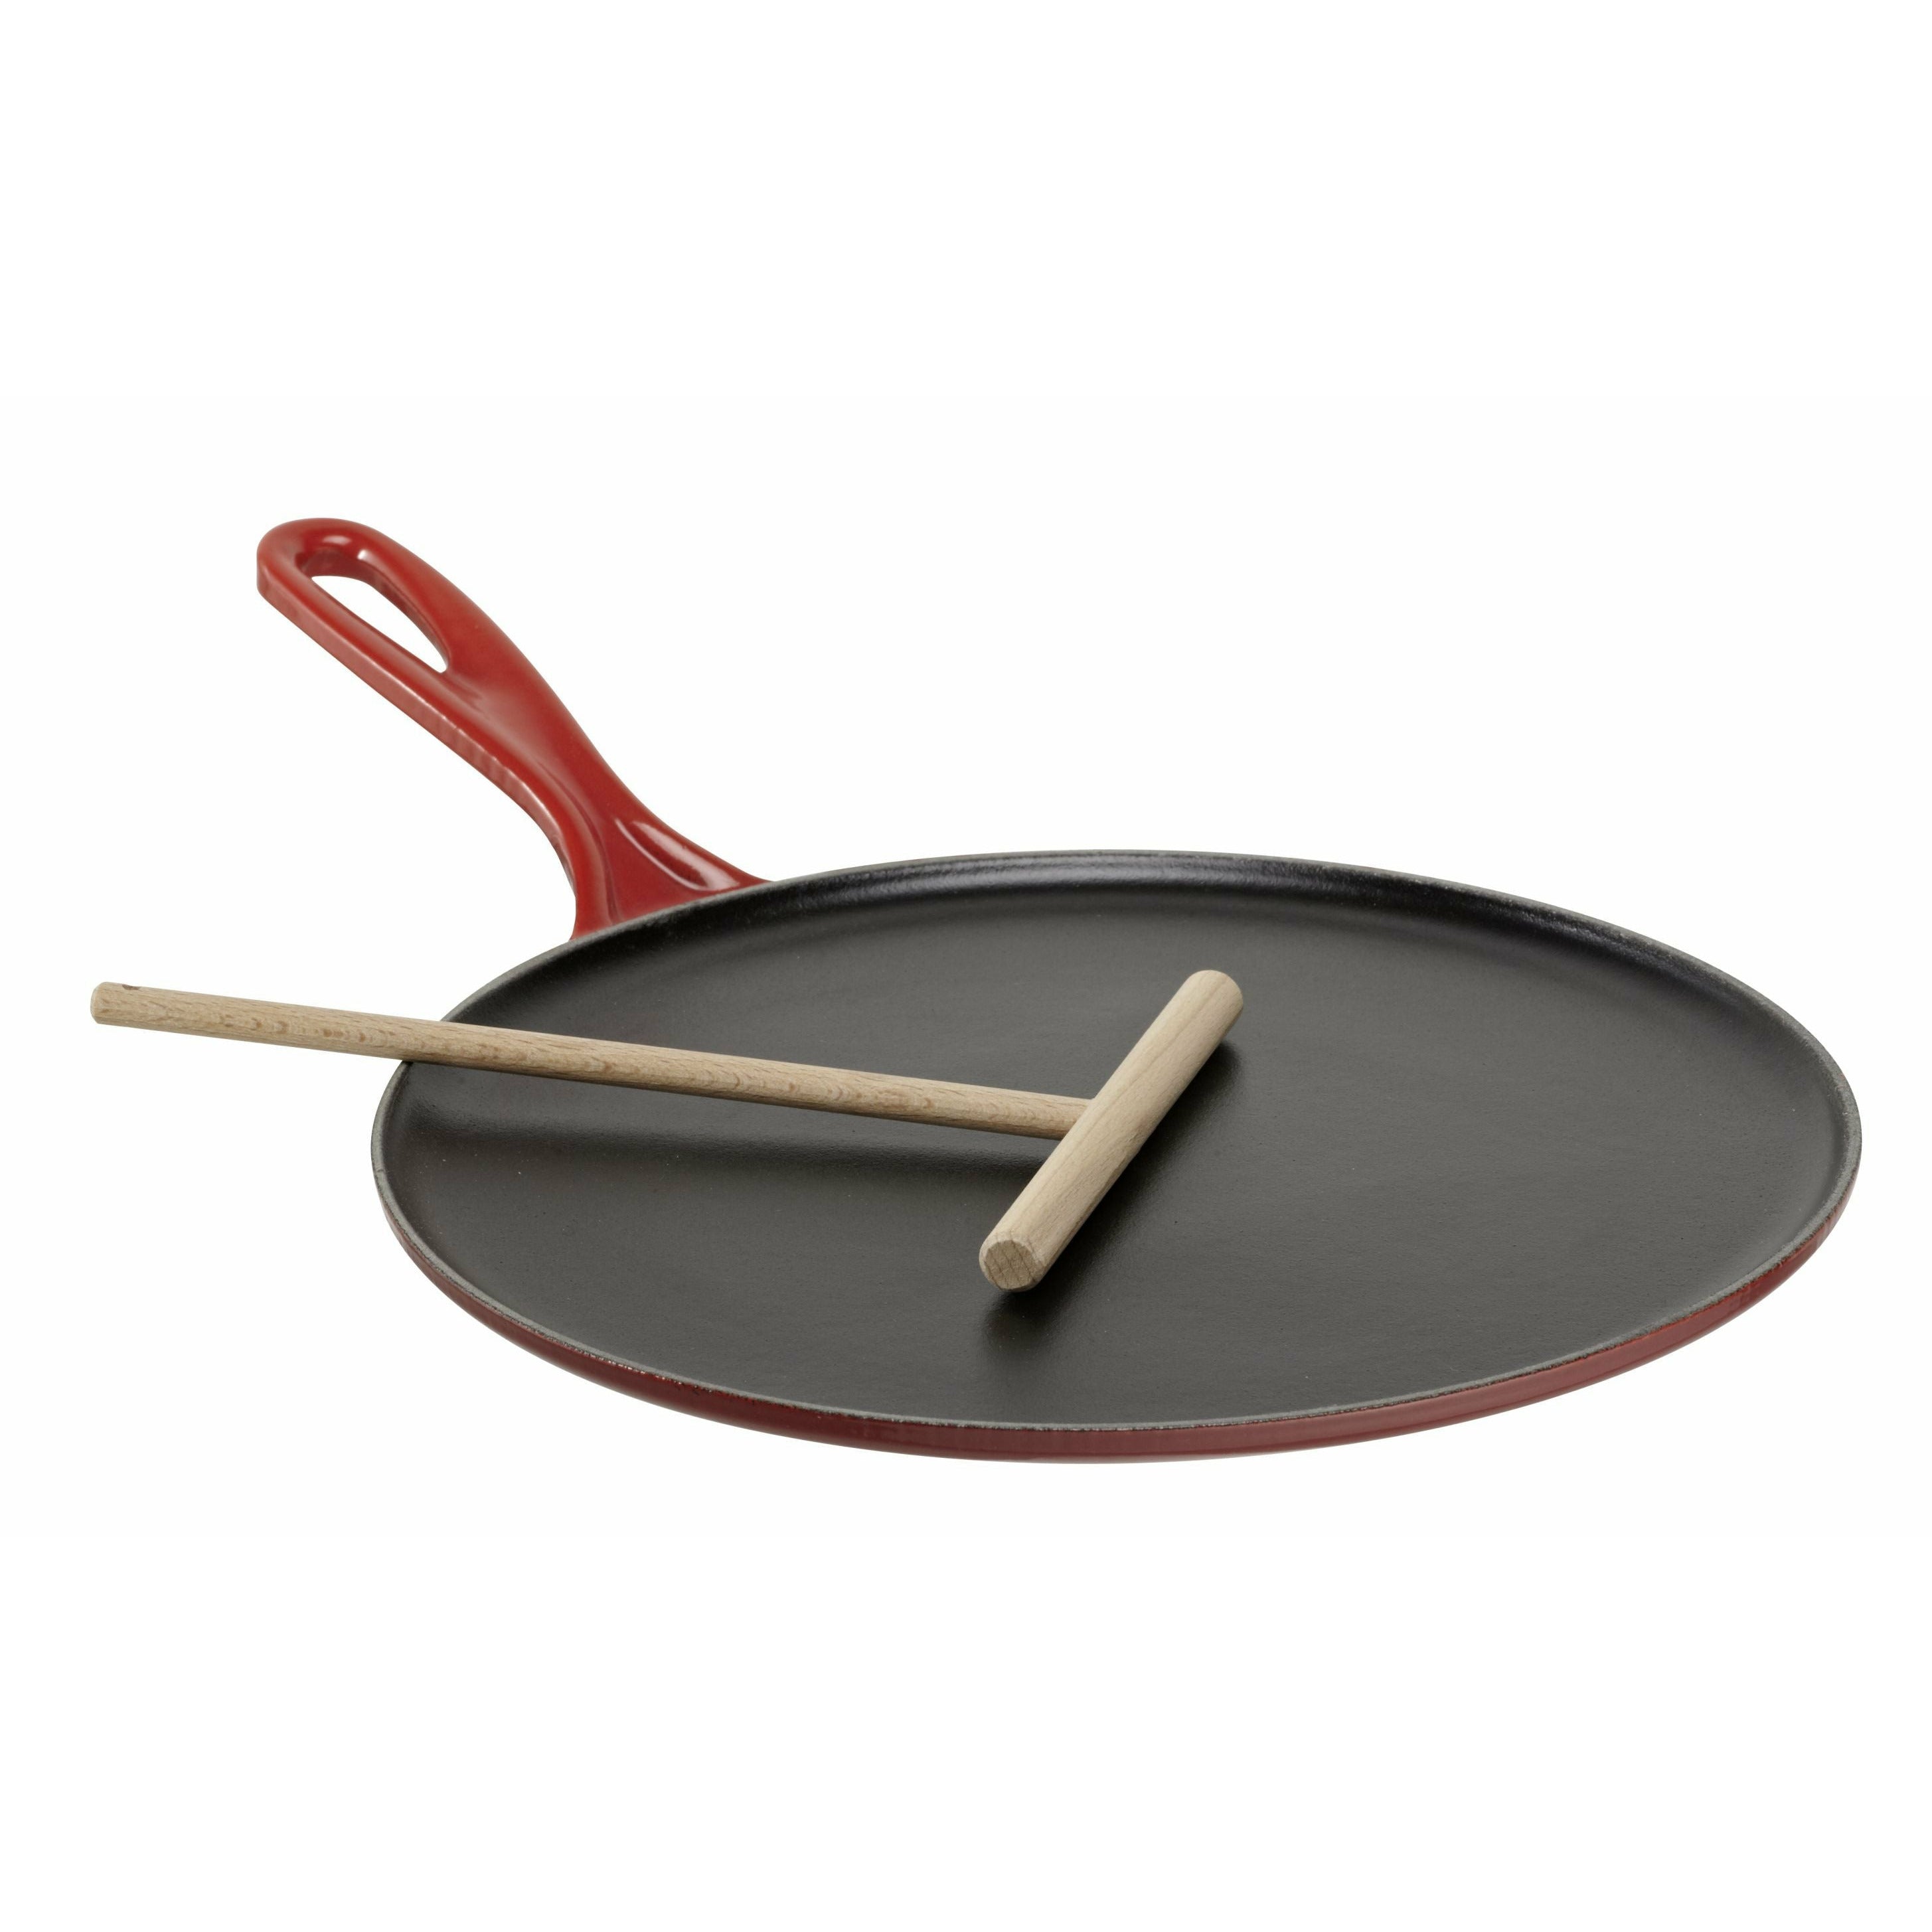 Le Creuset Tradycja Crêpes Pan Small, Cherry Red